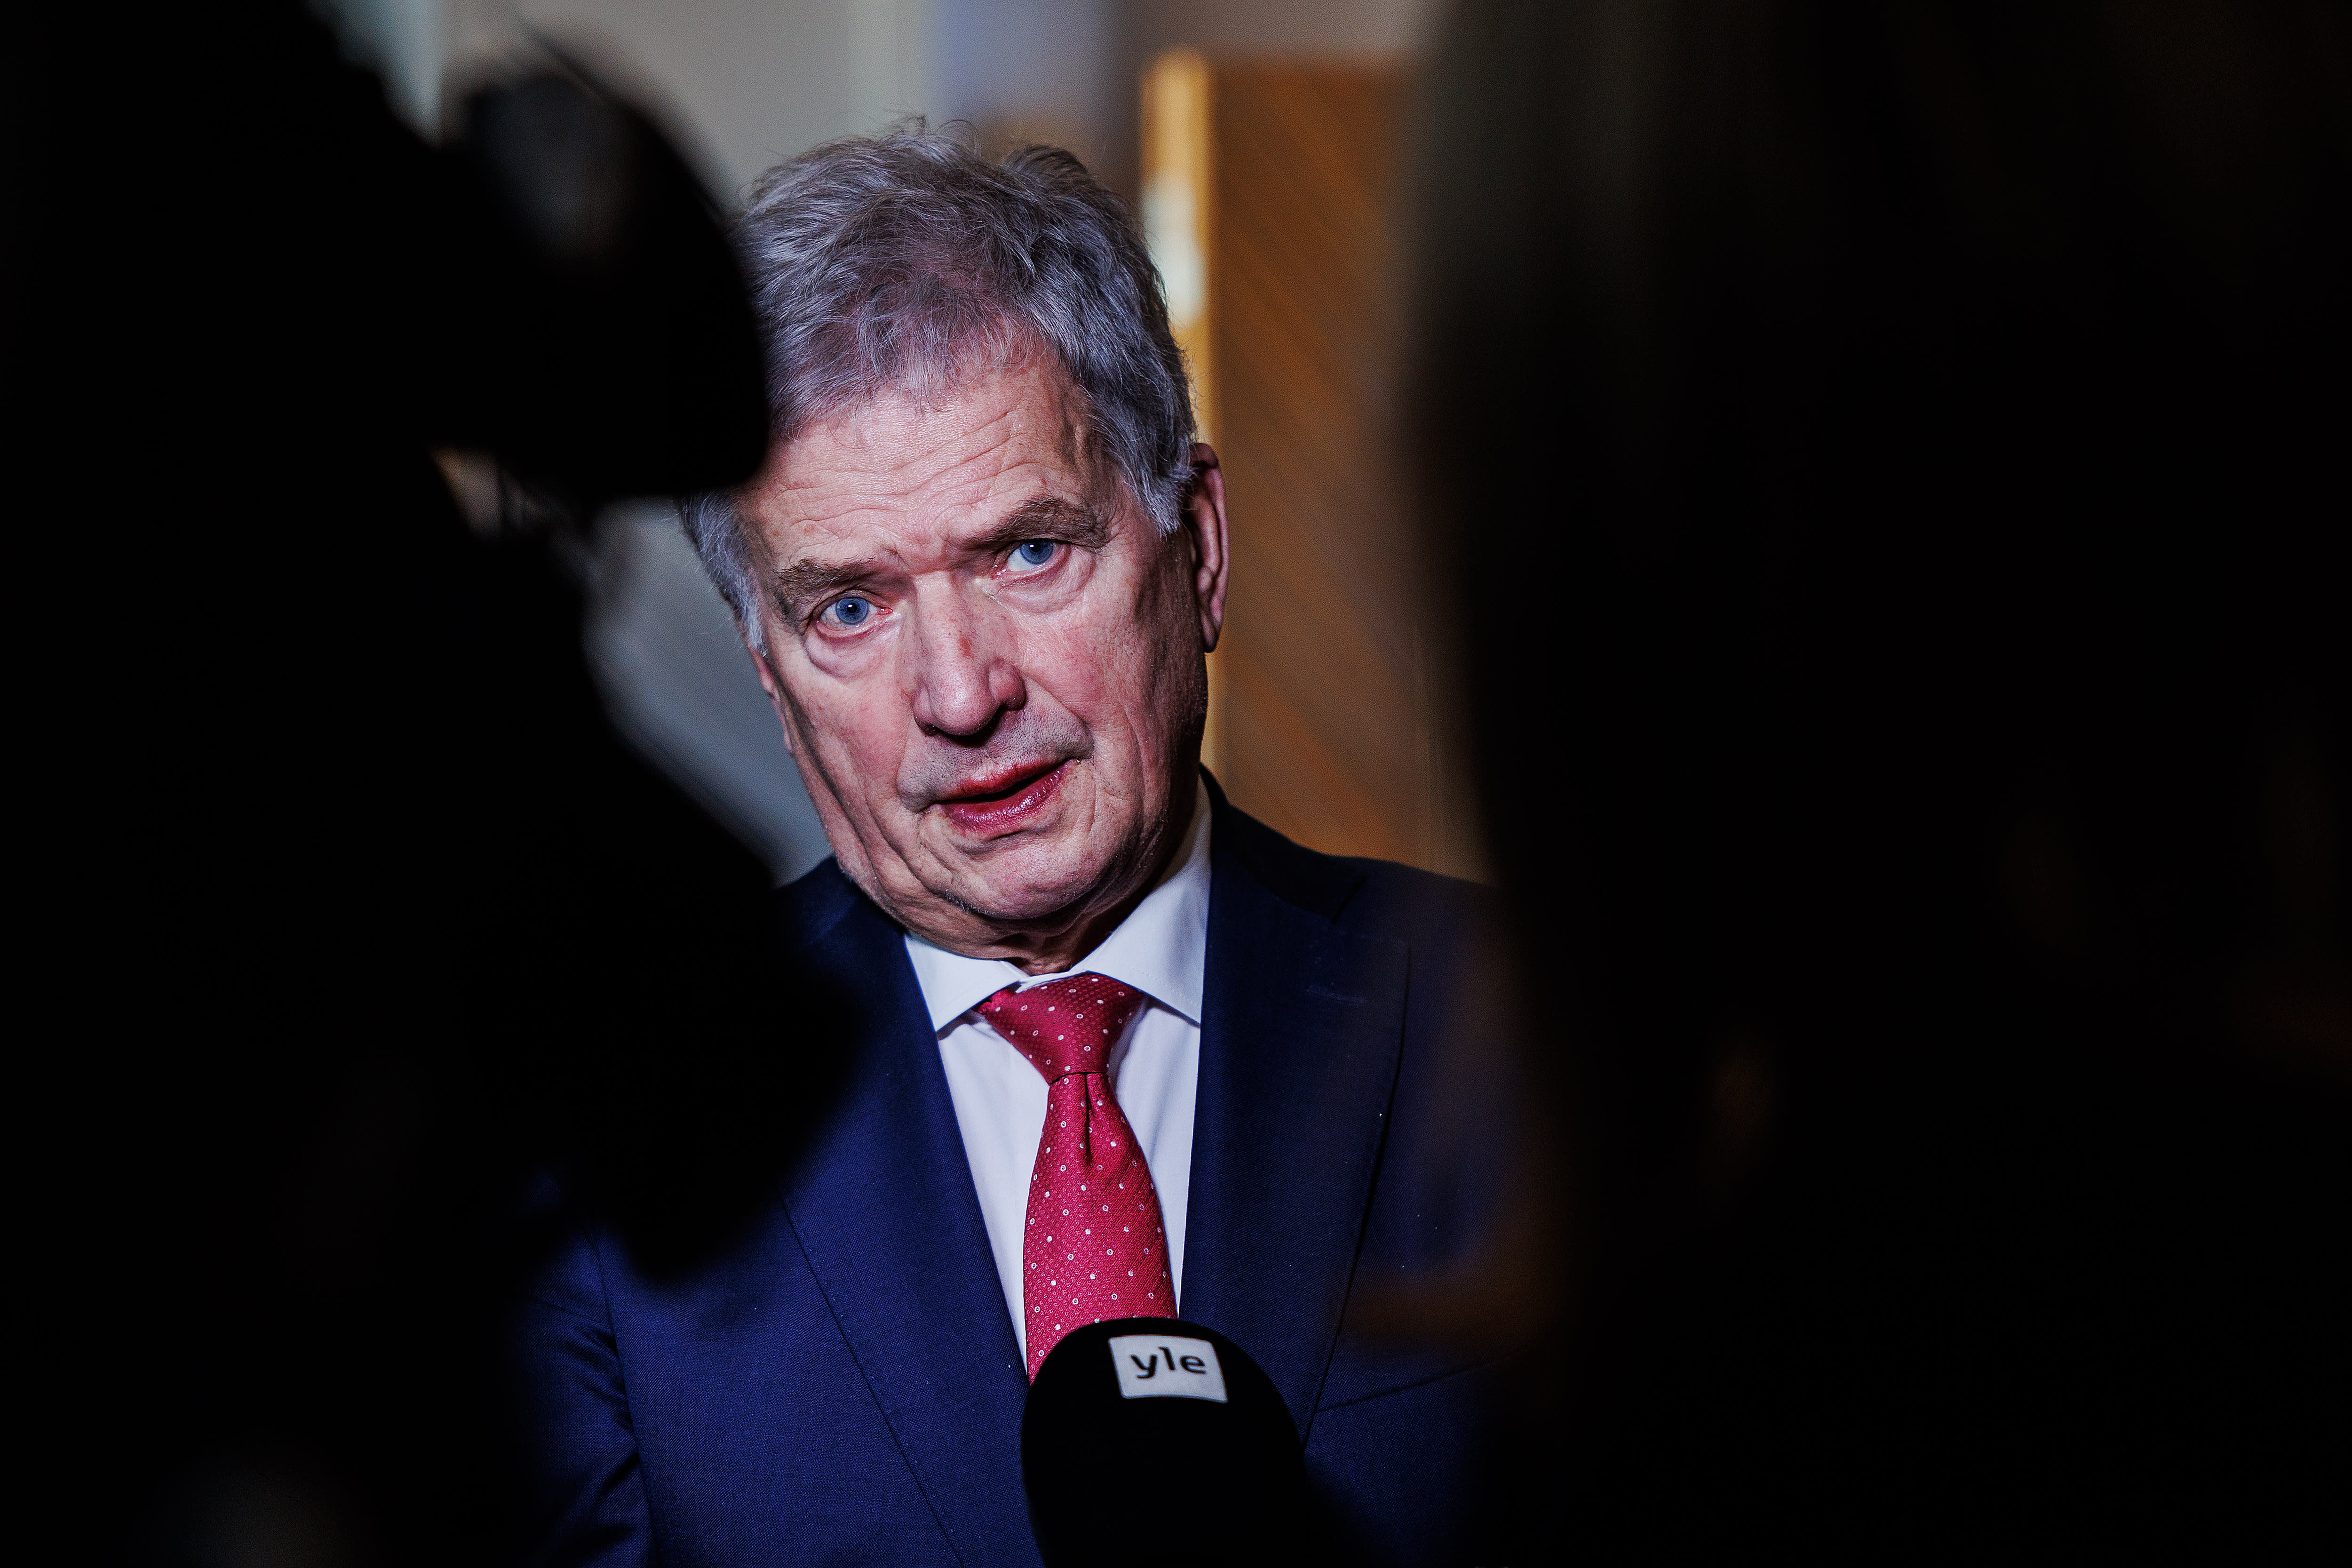 Niinistö will discuss foreign and security policy with party leaders before the elections